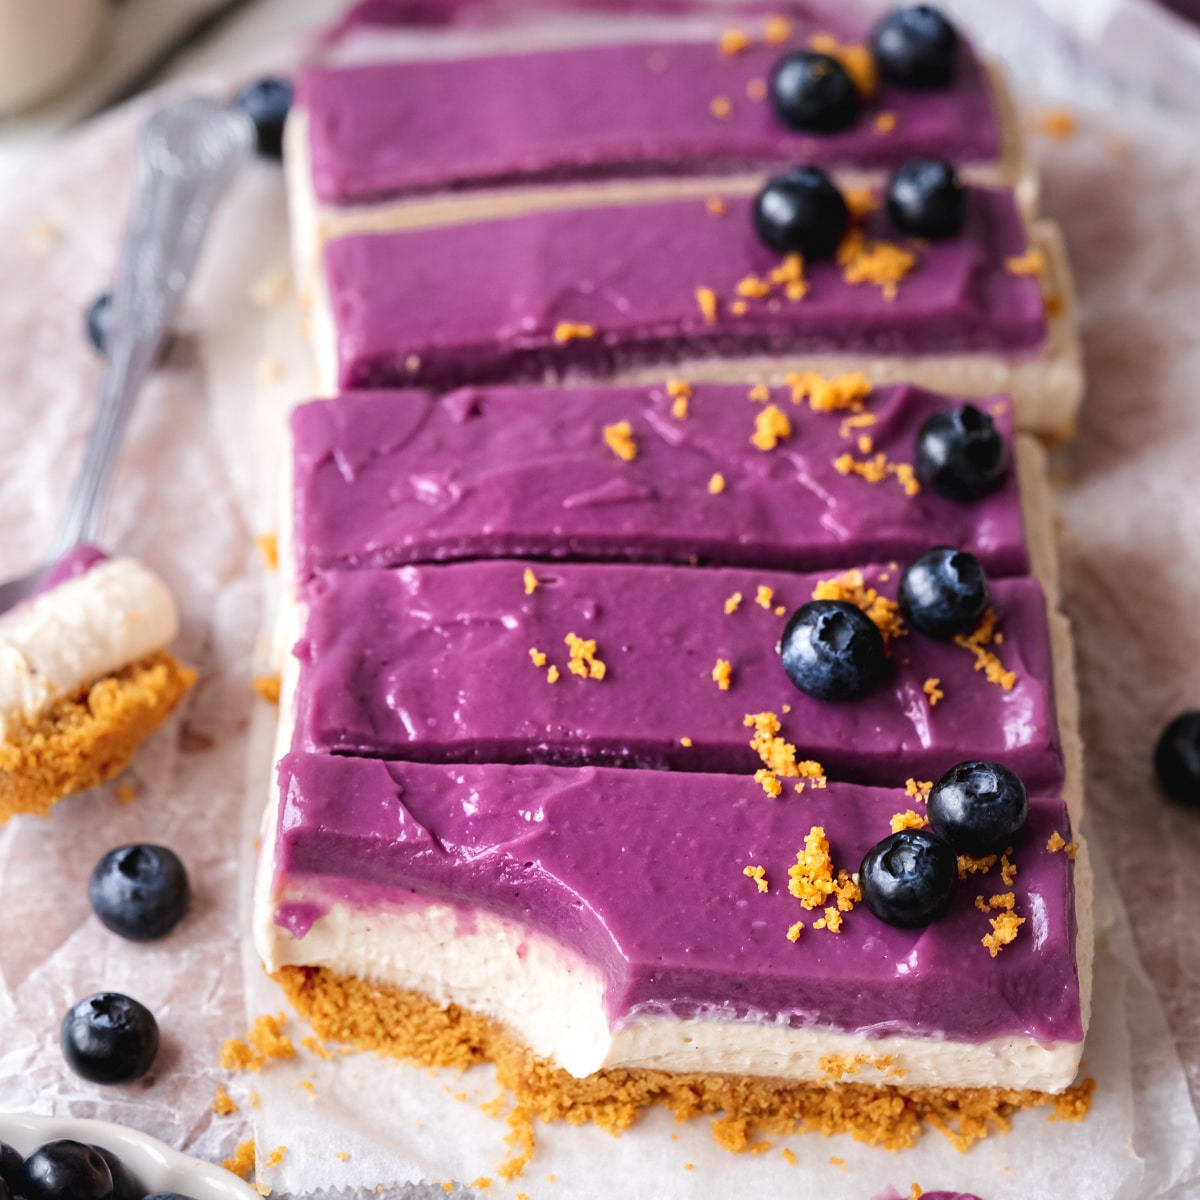 No Bake Blueberry Cheesecake Bars - Addicted to Dates